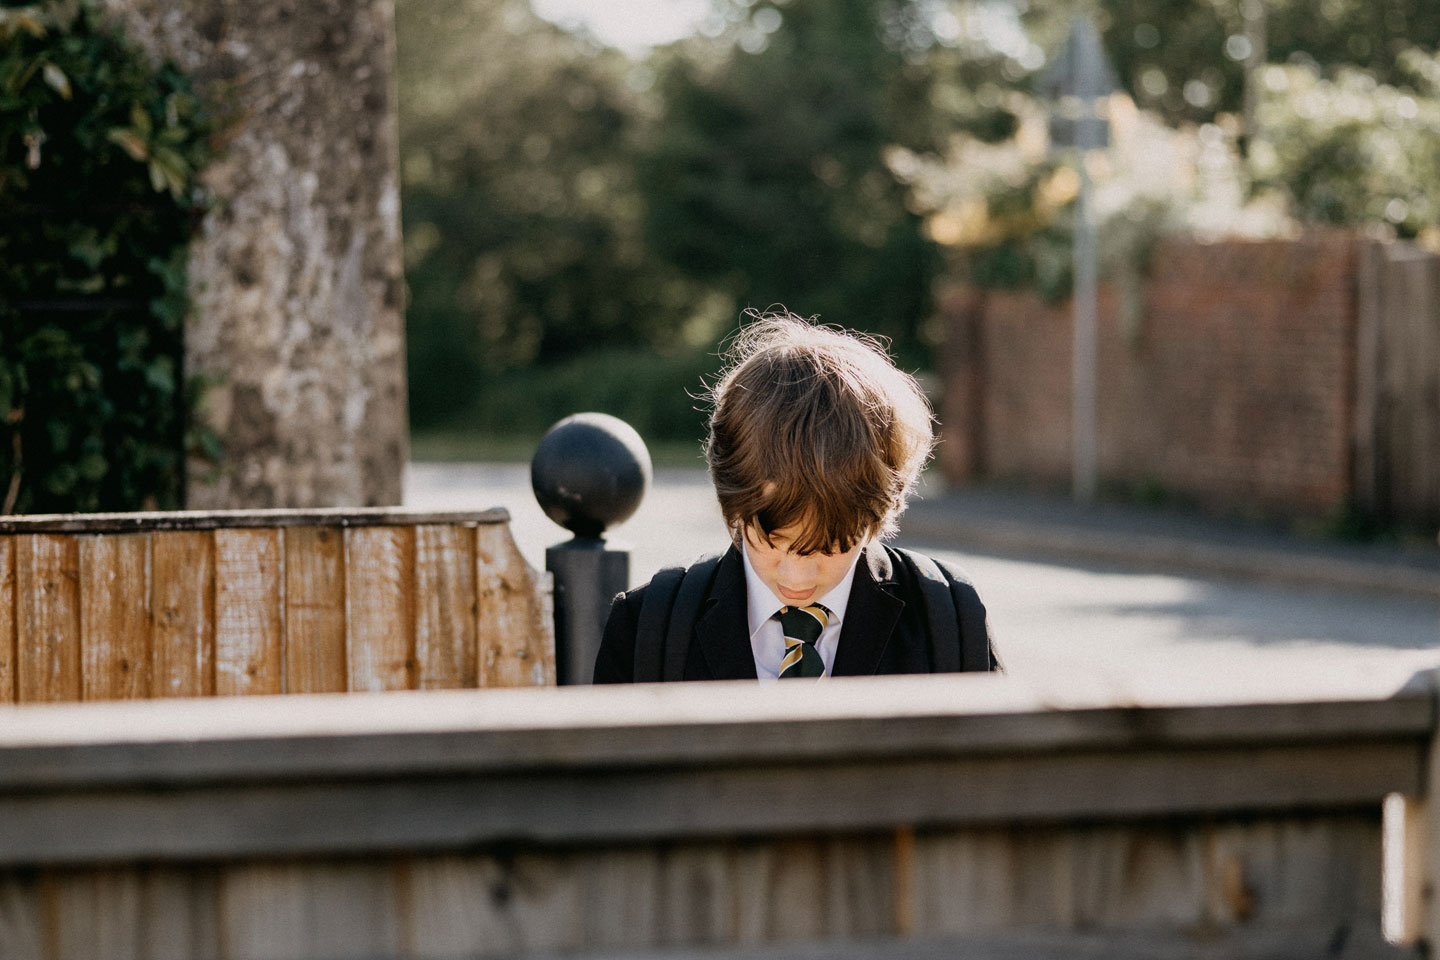 Russell-Cooke education law. An image of a school boy in uniform, stood behind a fence and looking down at the ground.